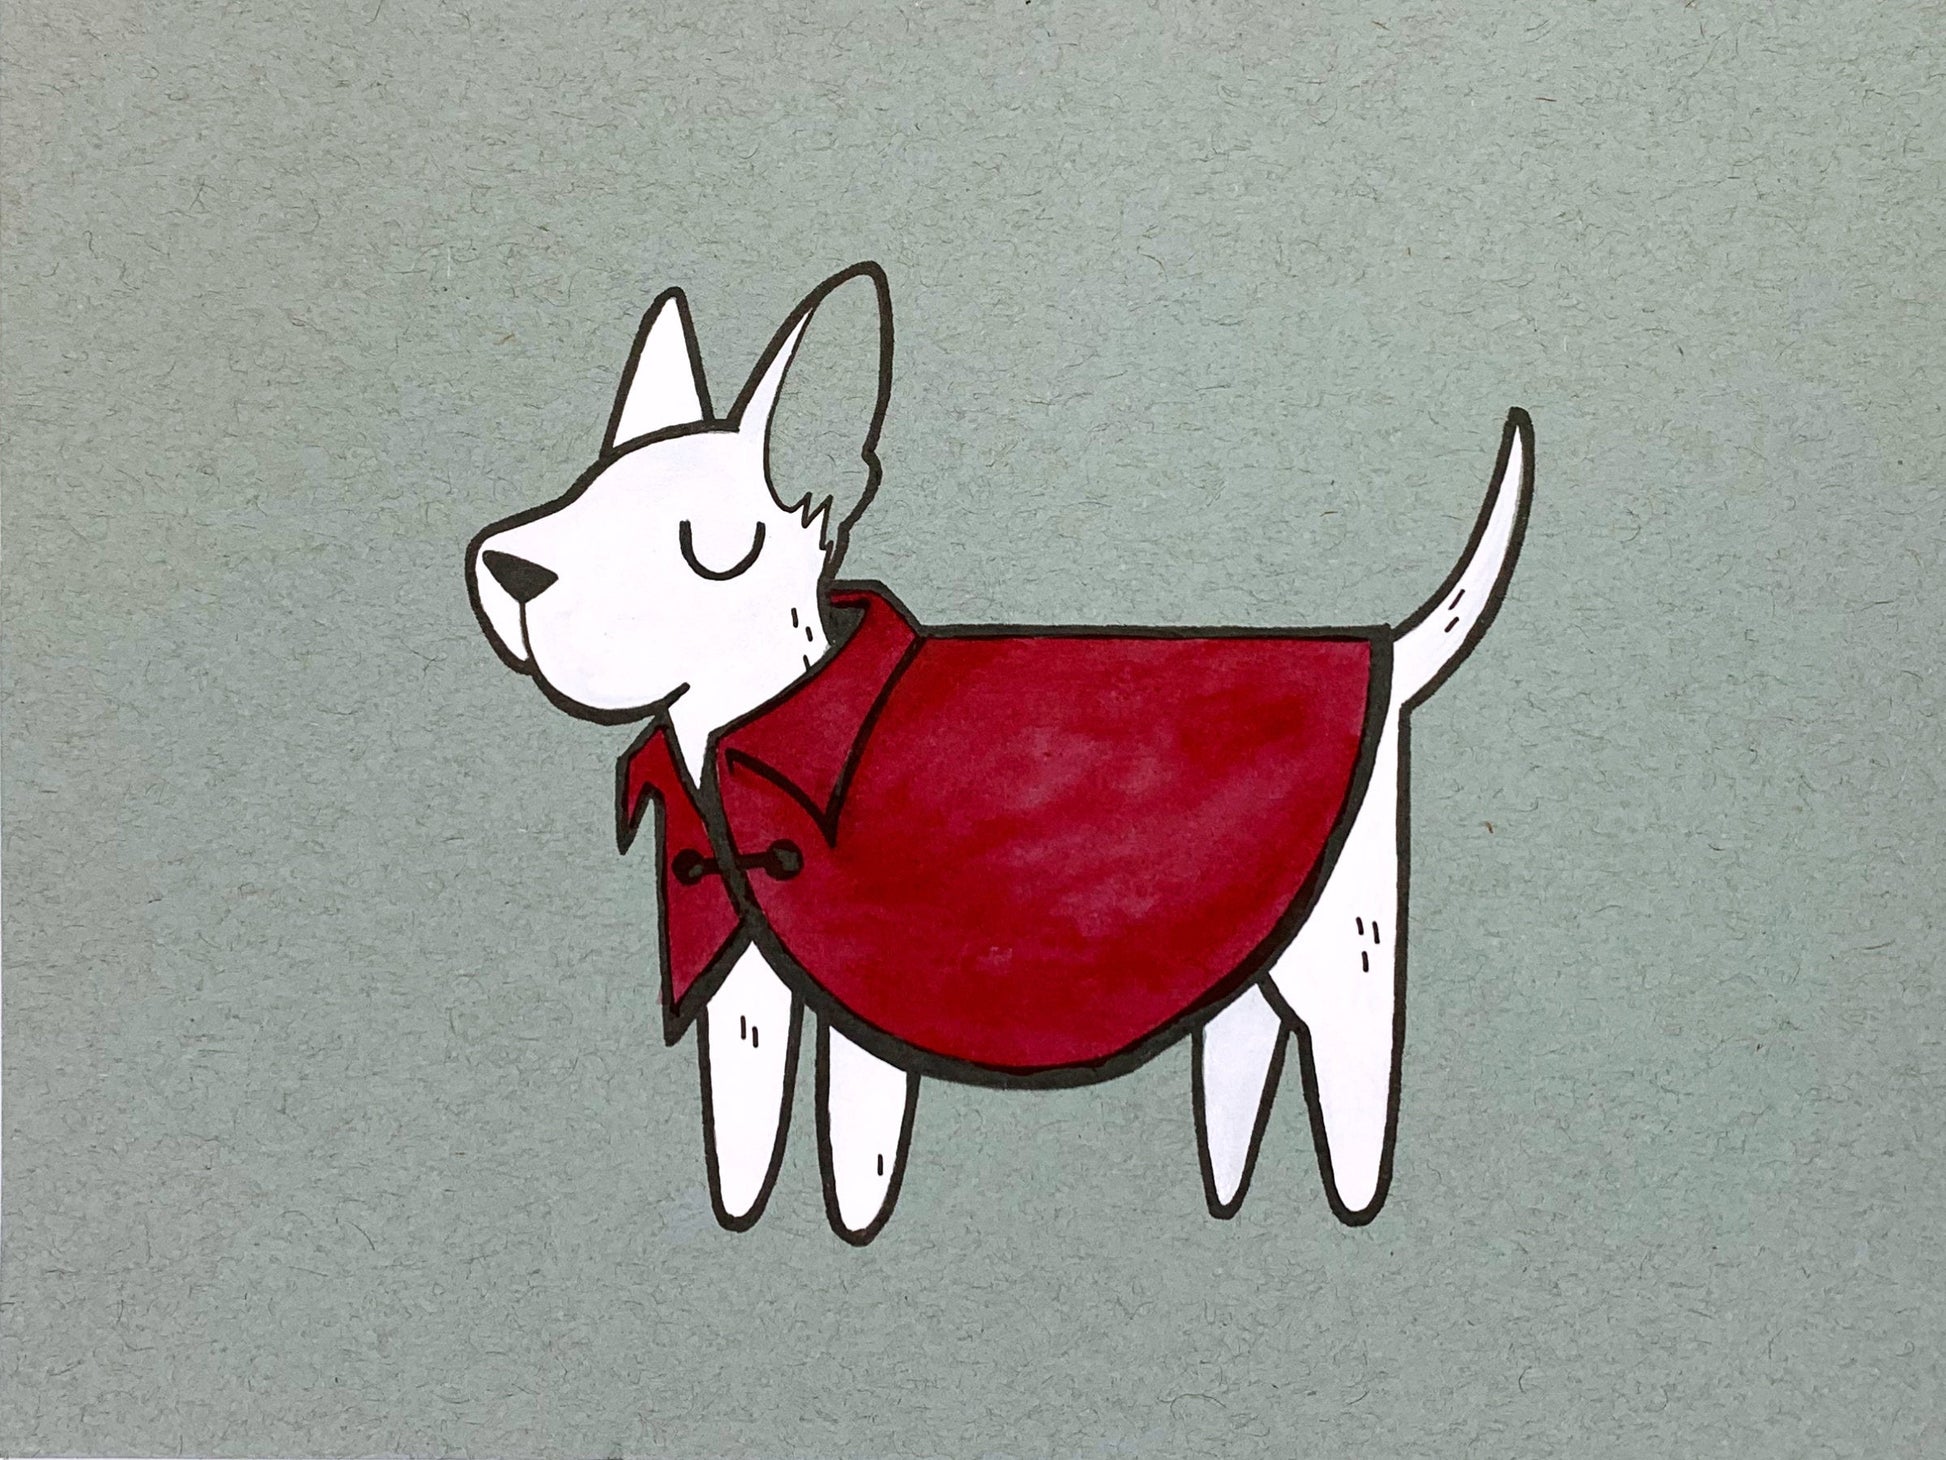 Original illustration of a white puppy dog wearing a smart red coat or jacket. Made using ink, watercolor, and gouache.